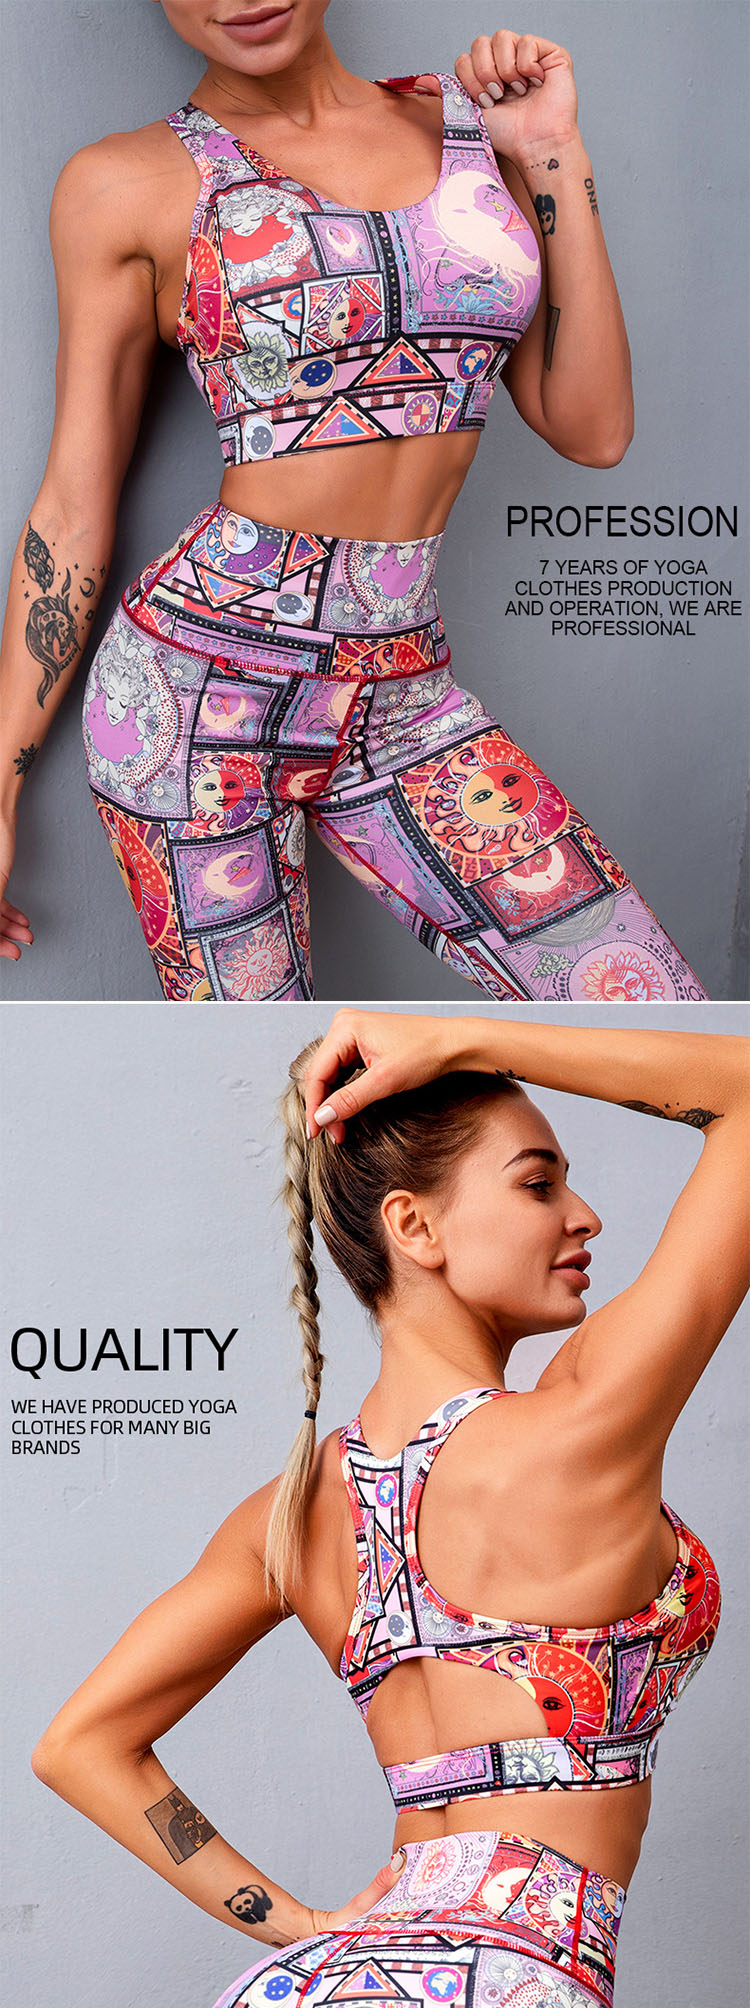 The unique floral pattern shows the difference while adding sports vitality.